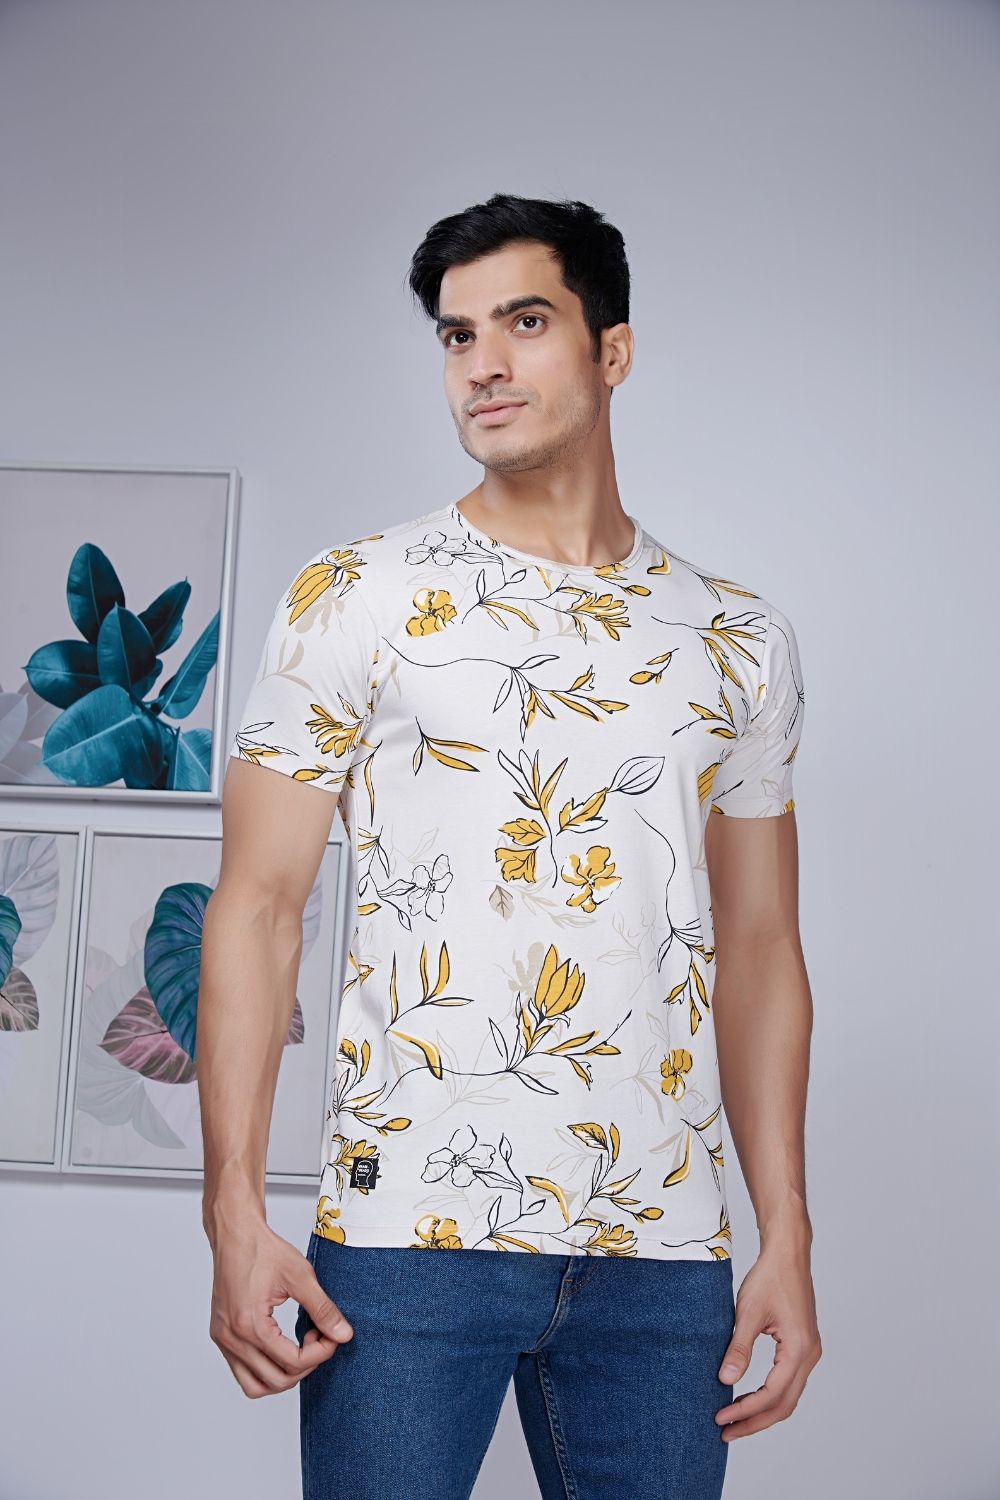 White color, blossom style all over print T shirt for men with half sleeves and round neck, close up.